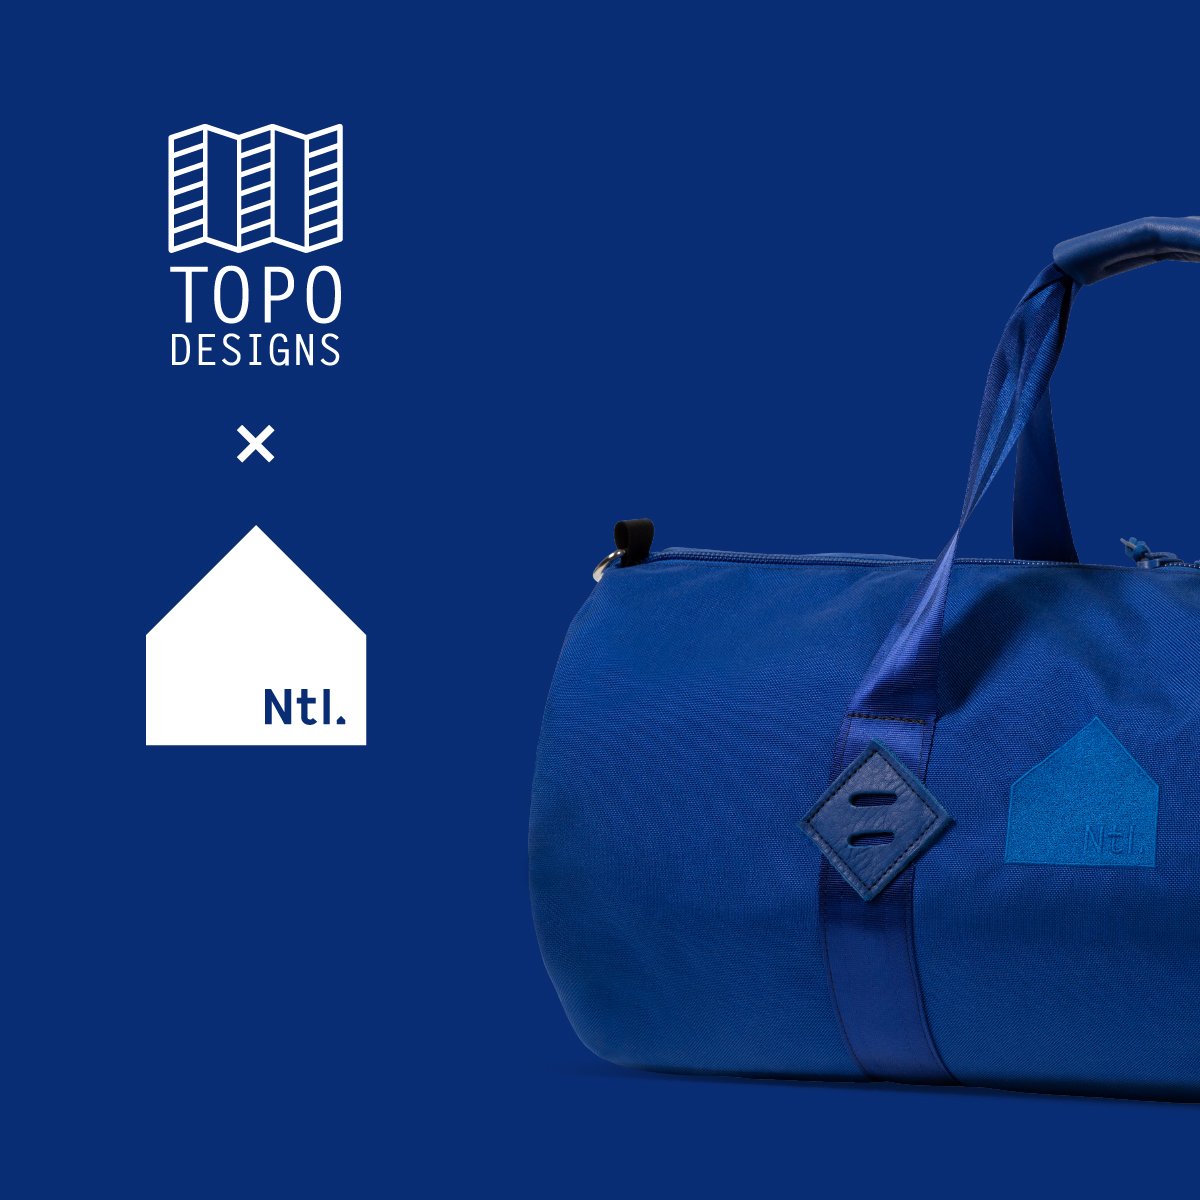 The National x Topo Designs Playlist